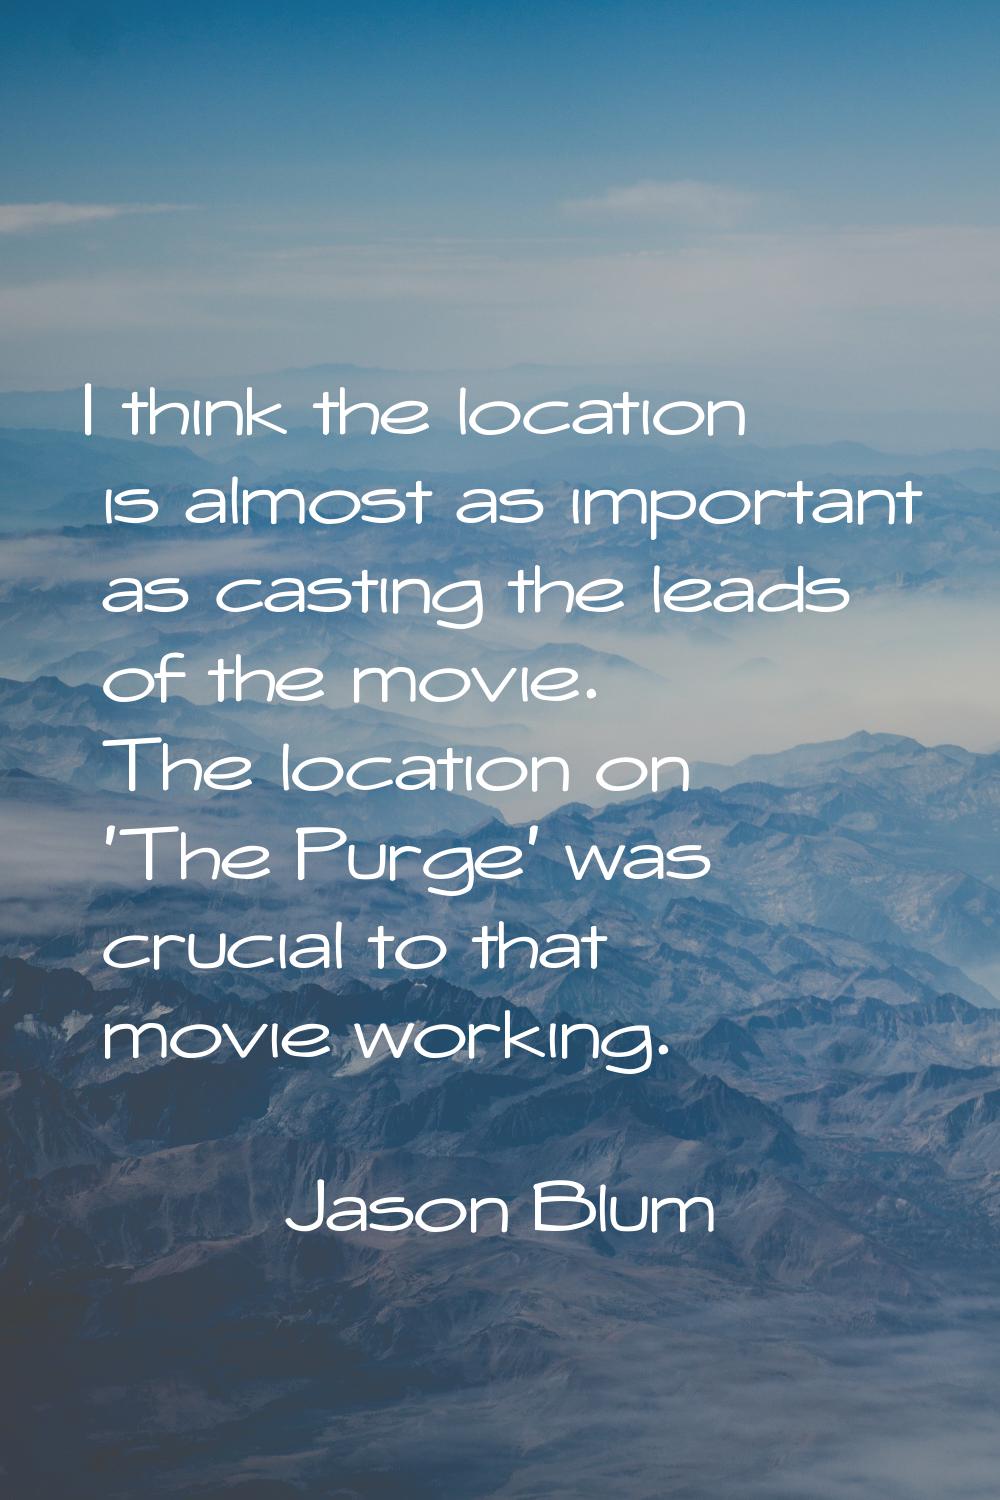 I think the location is almost as important as casting the leads of the movie. The location on 'The